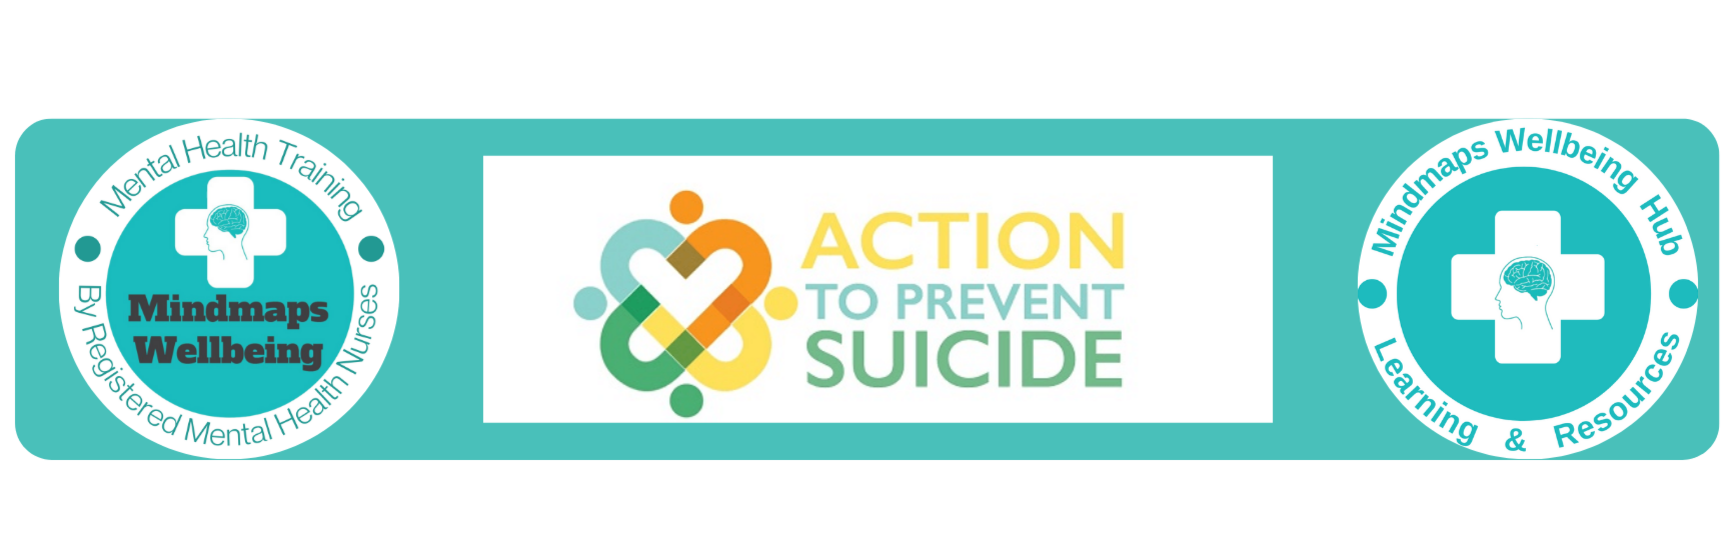 Mindmaps Wellbeing & Action to Prevent Suicide logos